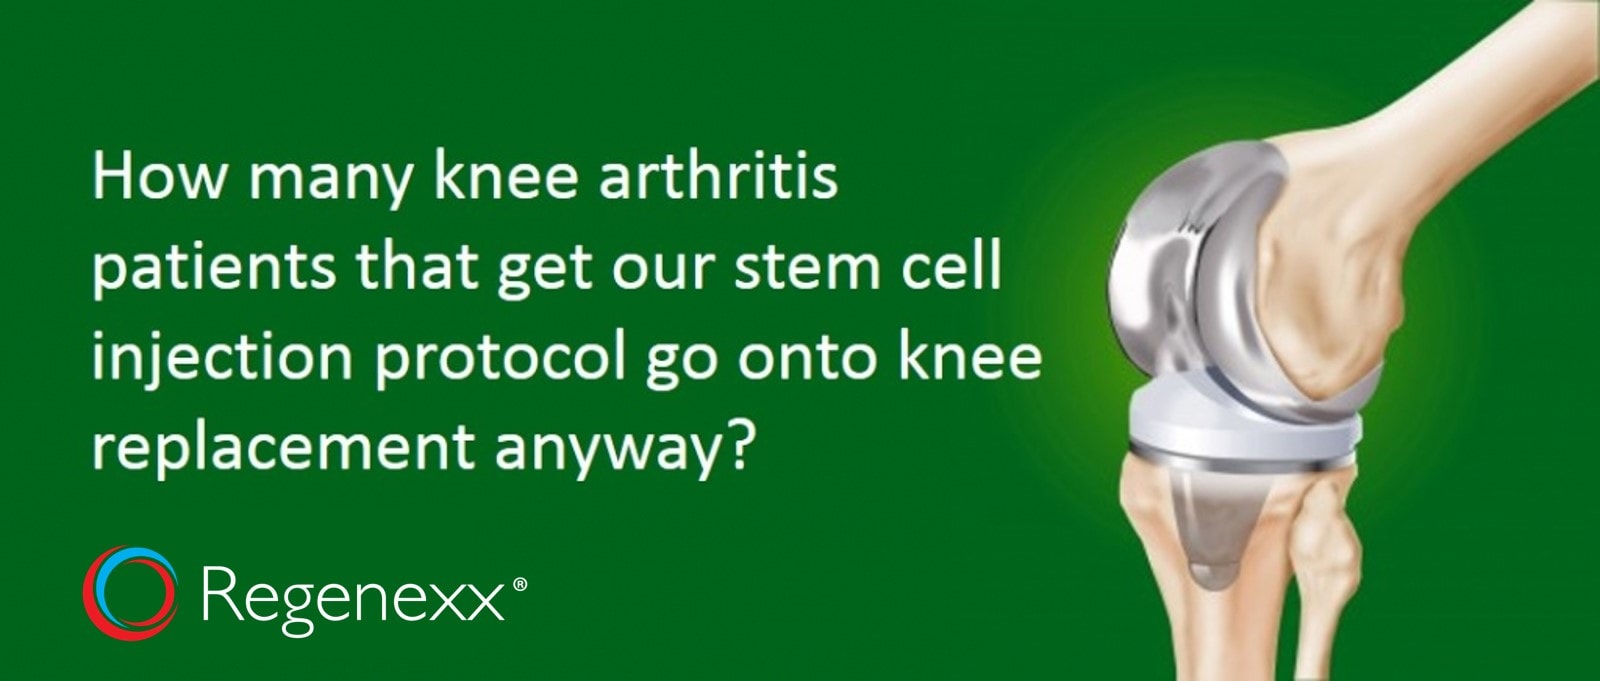 How Many Stem Cell Patients Convert to Knee Replacement